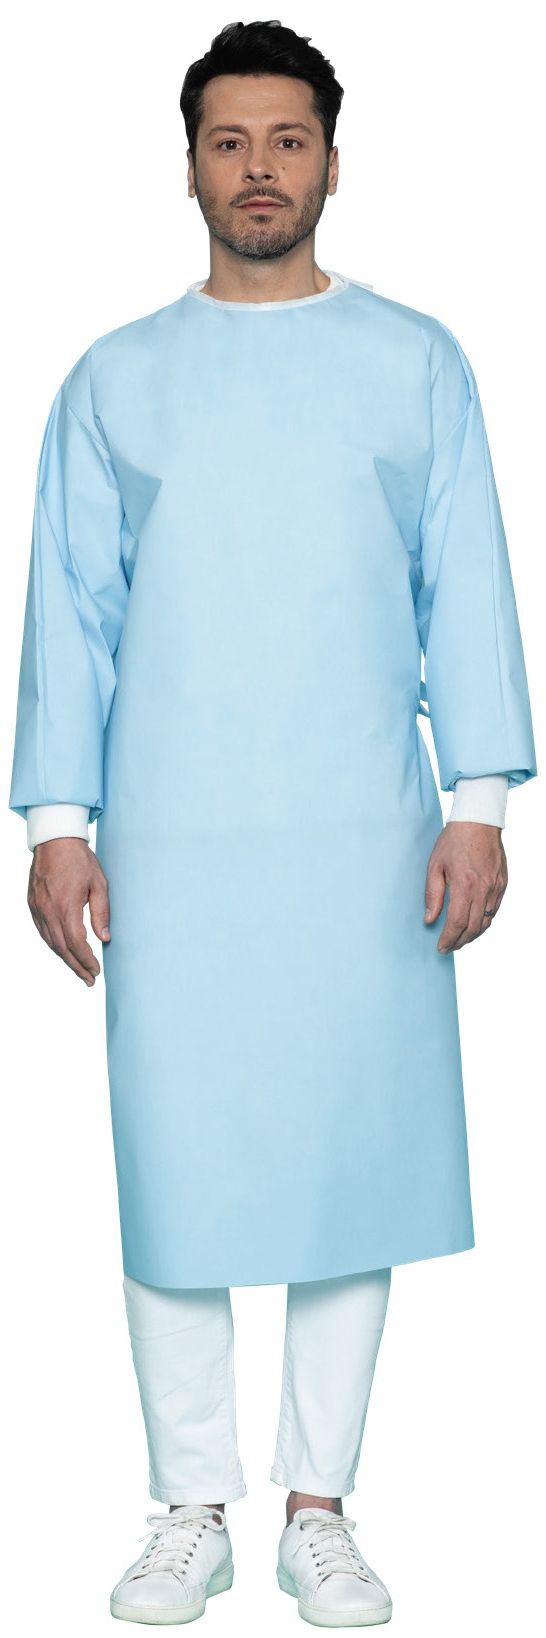 Level 3 Surgical Gown